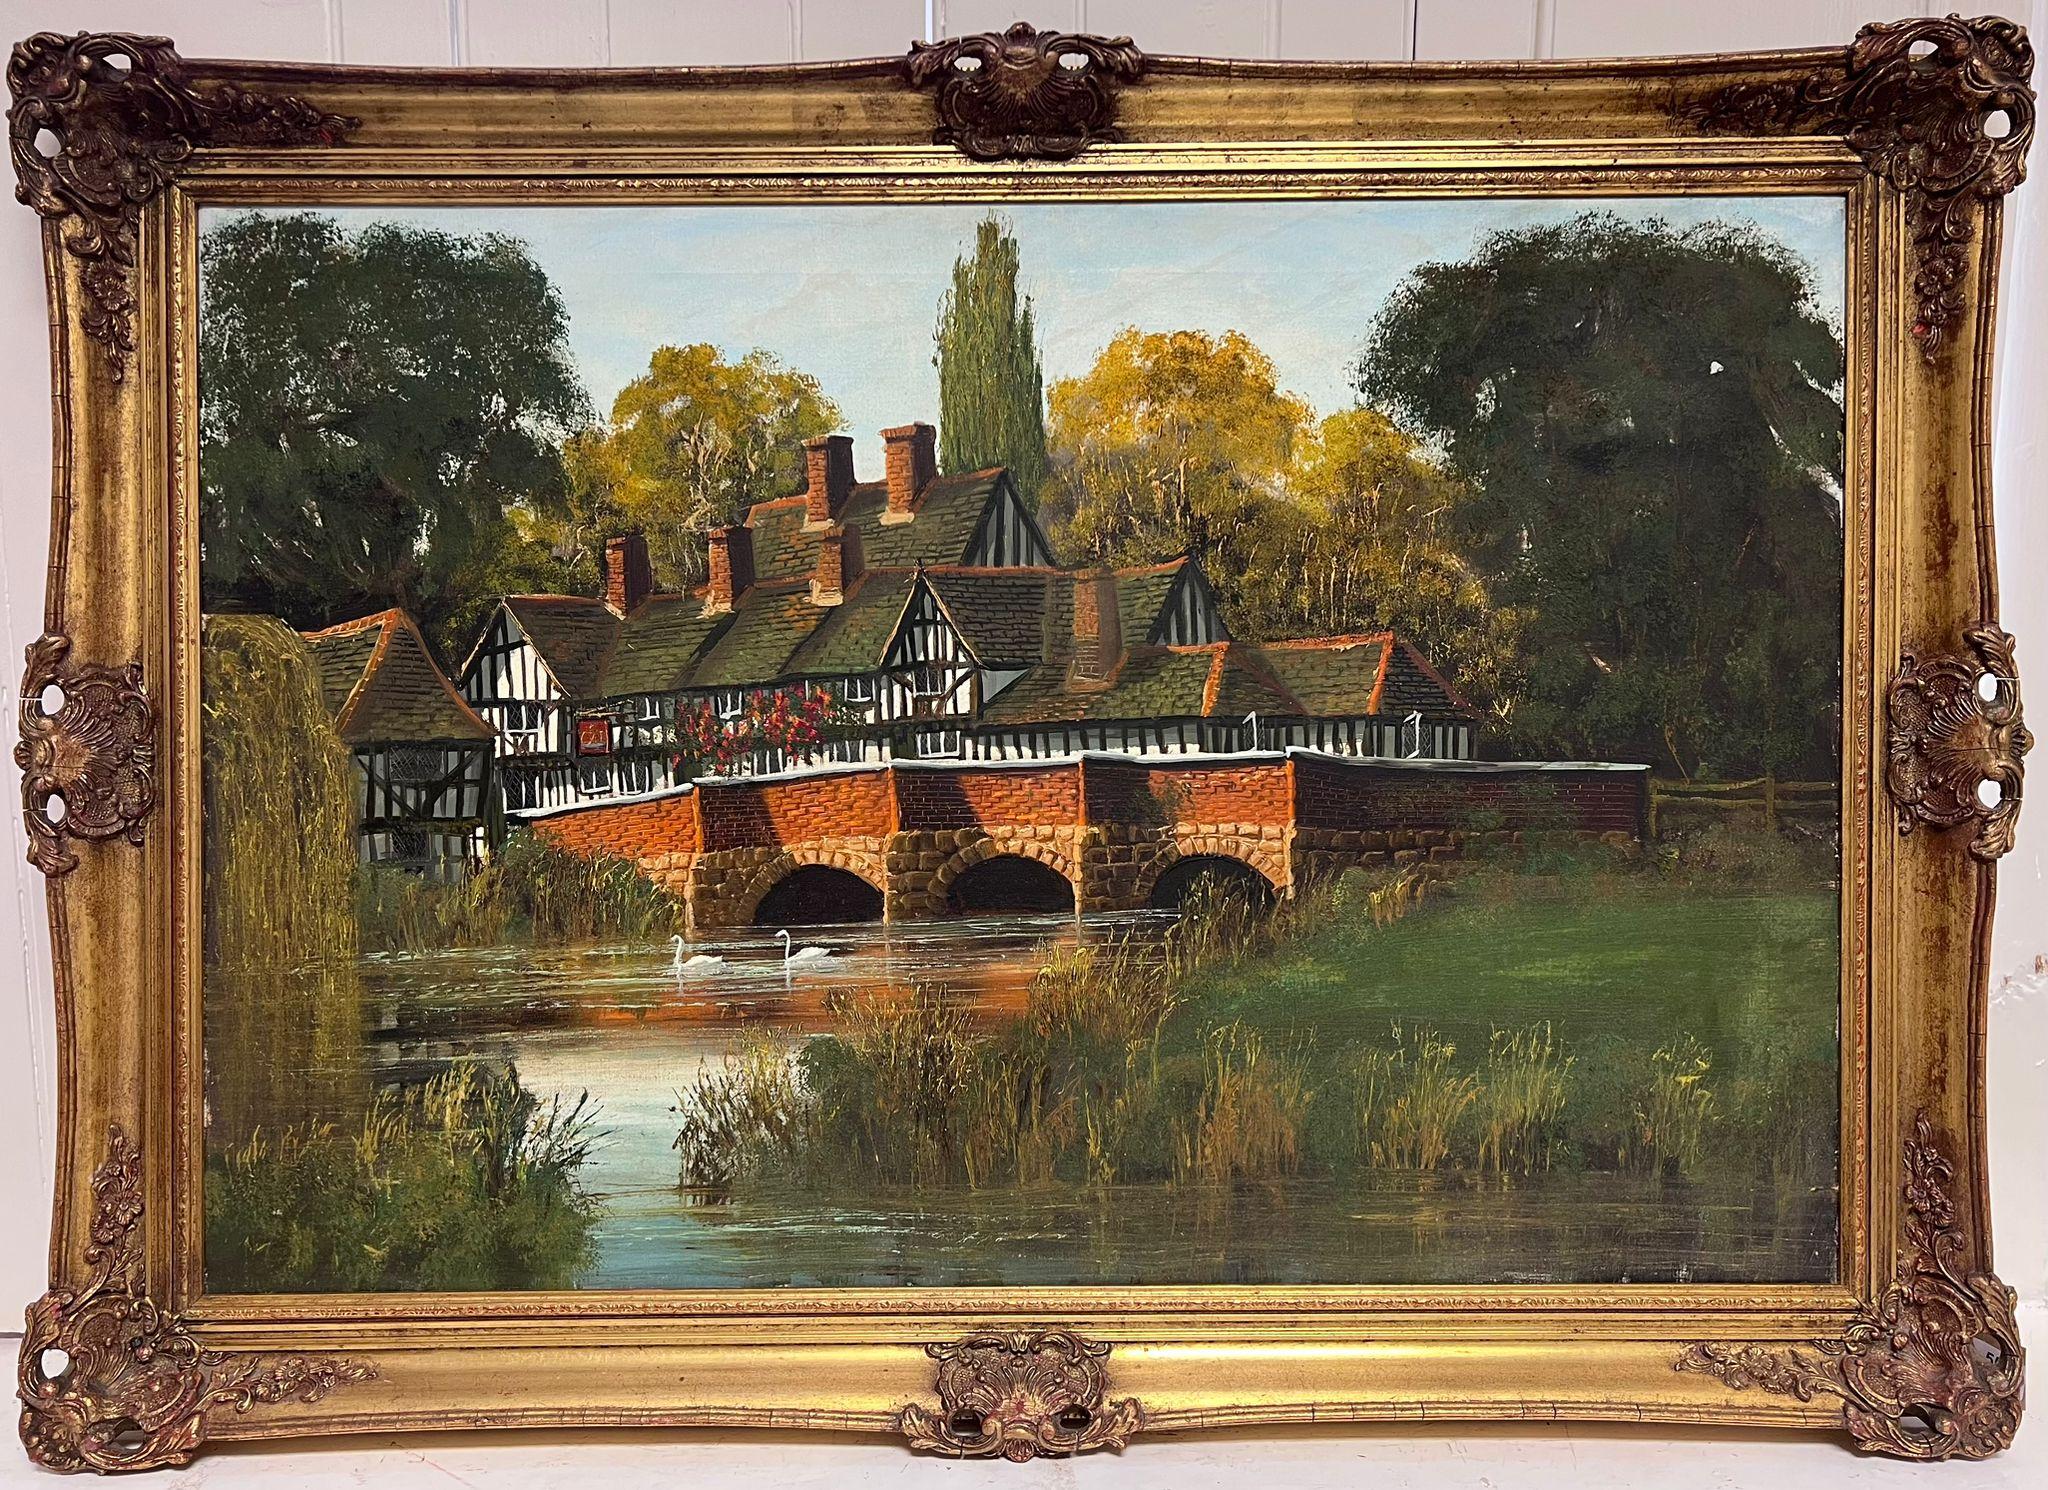 Large Old Tudor Coaching Inn by River Landscape & Swans Very Large English Oil - Painting by British School